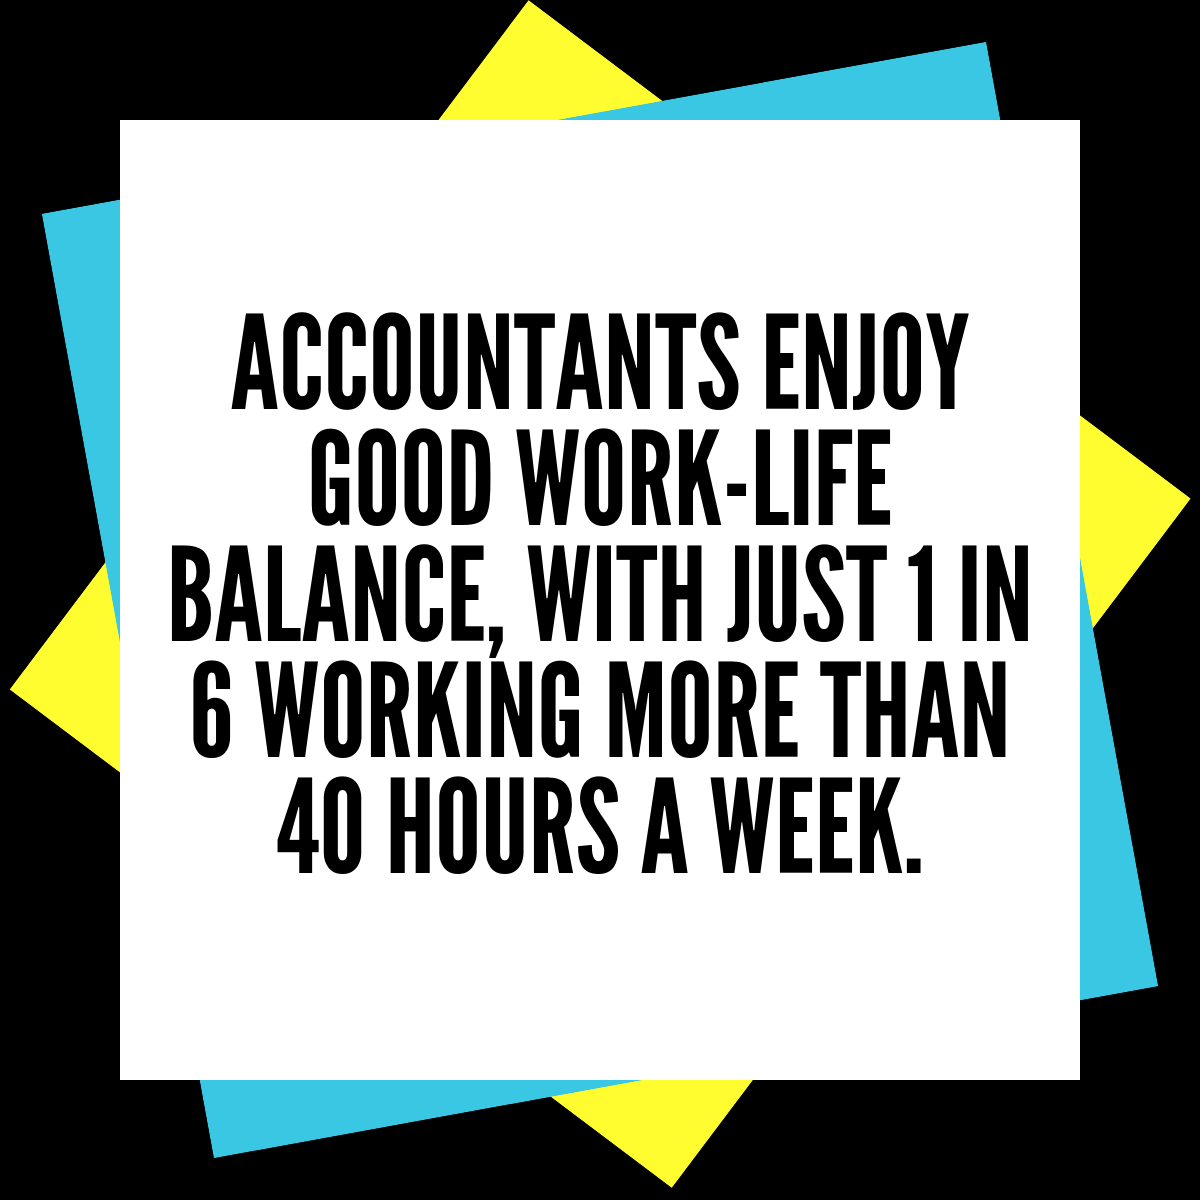 Accountants enjoy good work-life balance, with just 1 in 6 working more than 40 hours a week.